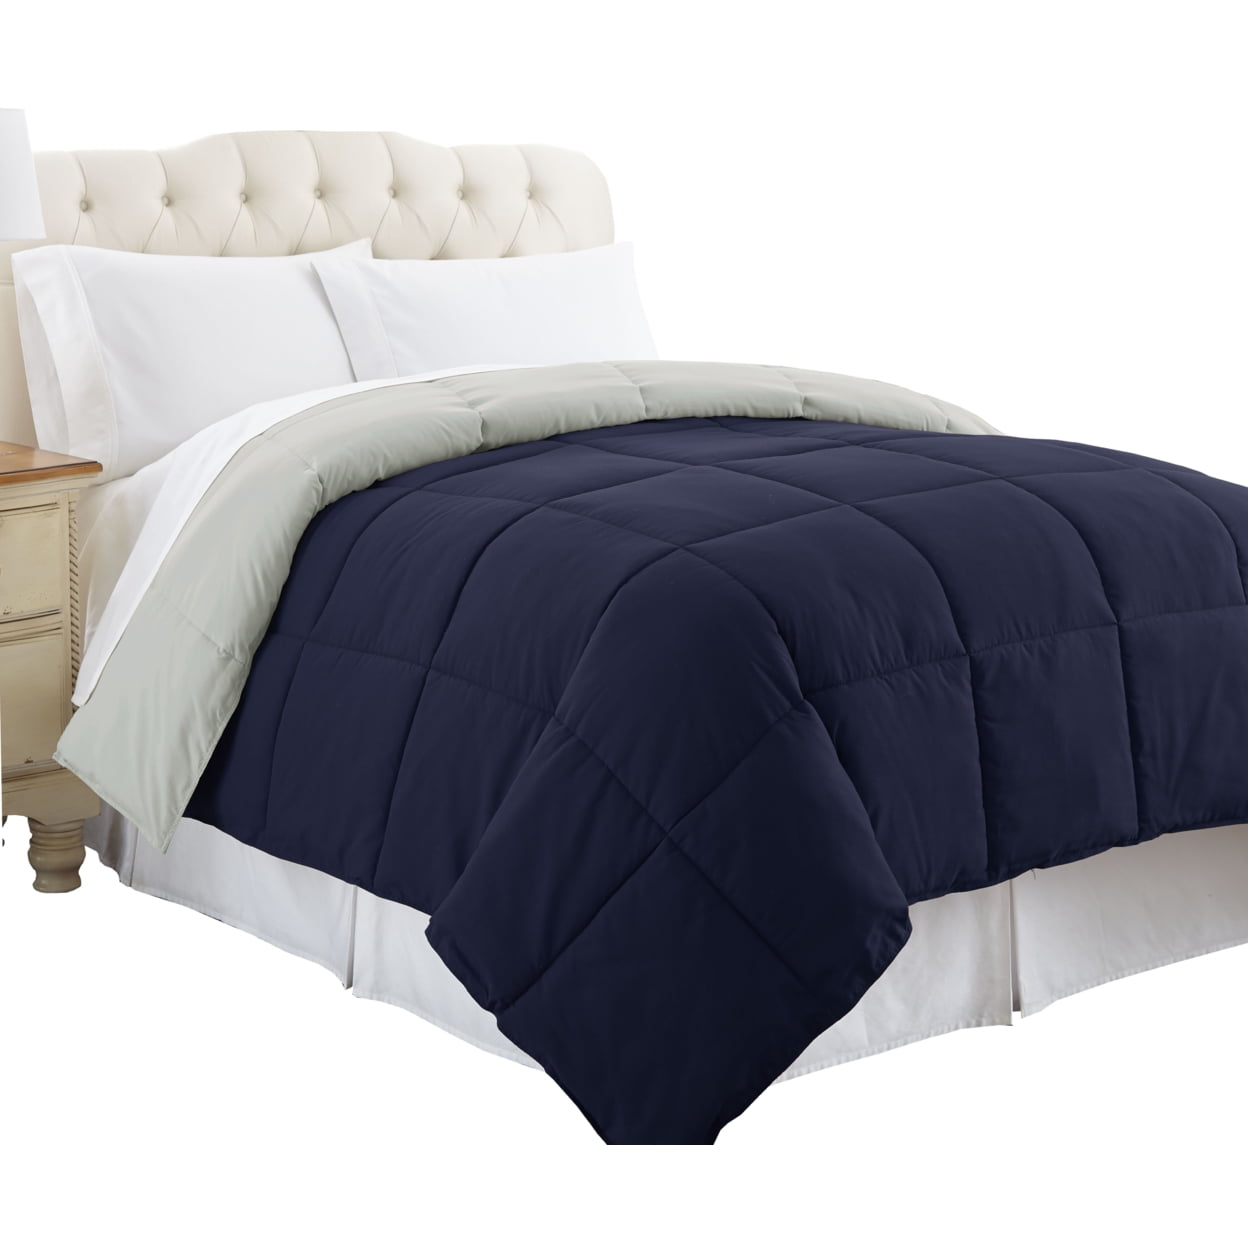 Bm46028 Genoa Reversible Queen Size Comforter With Box Quilting, Silver & Blue